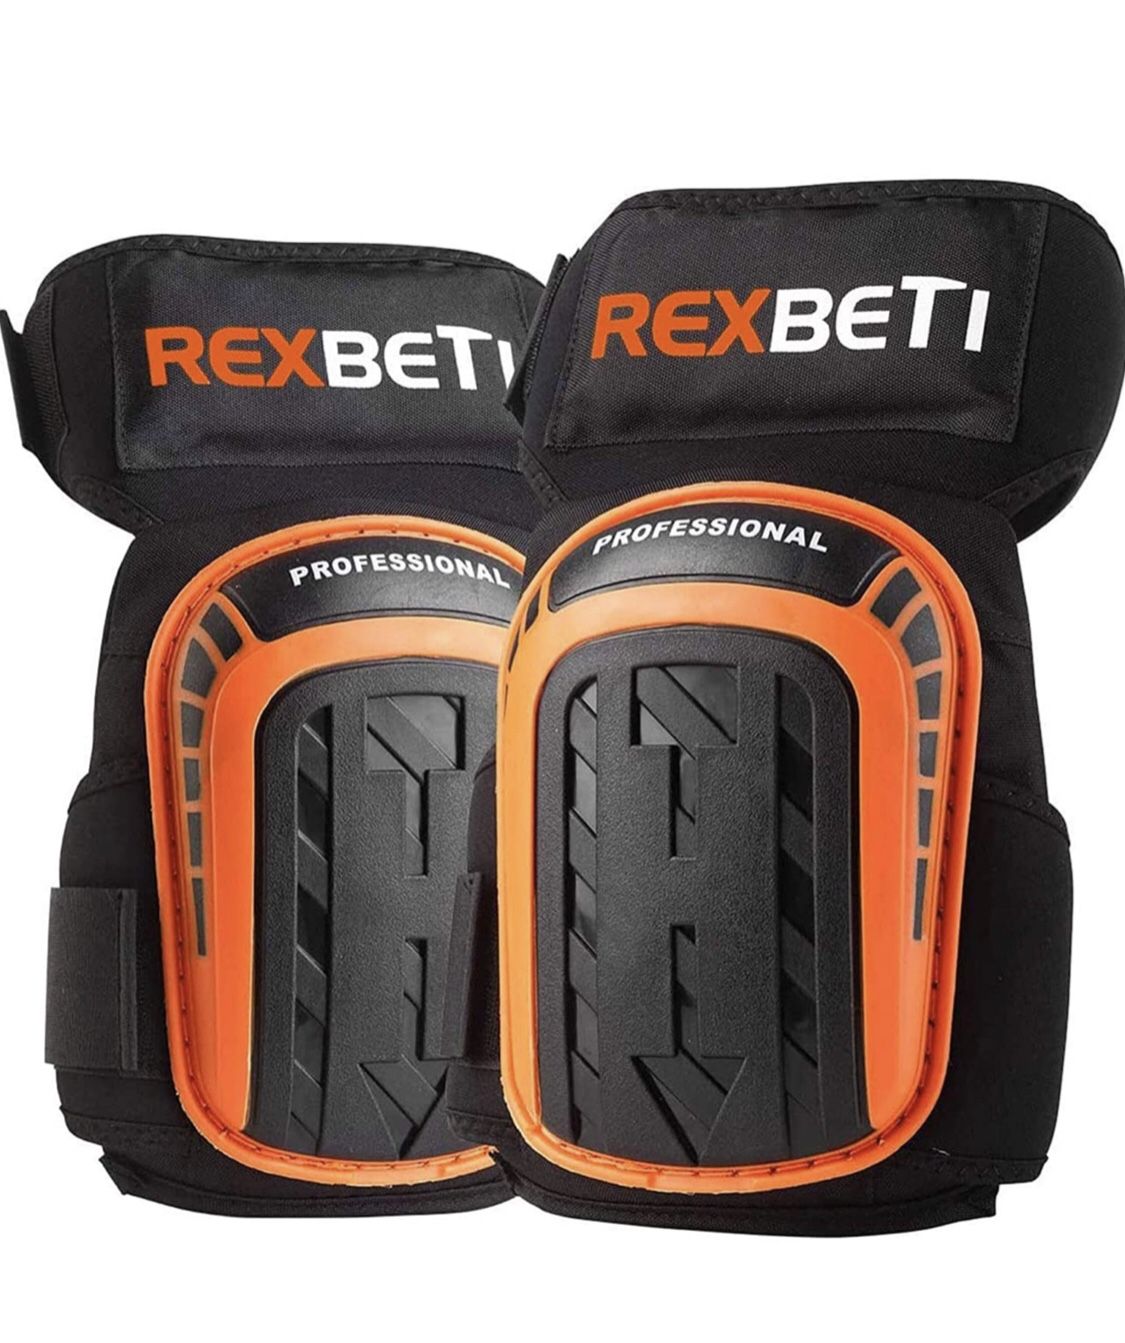 REXBETI Knee Pads for Work, Construction Gel Knee Pads Tools, Heavy Duty Comfortable Anti-slip Foam Knee Pads for Cleaning Flooring and Garden, Strong